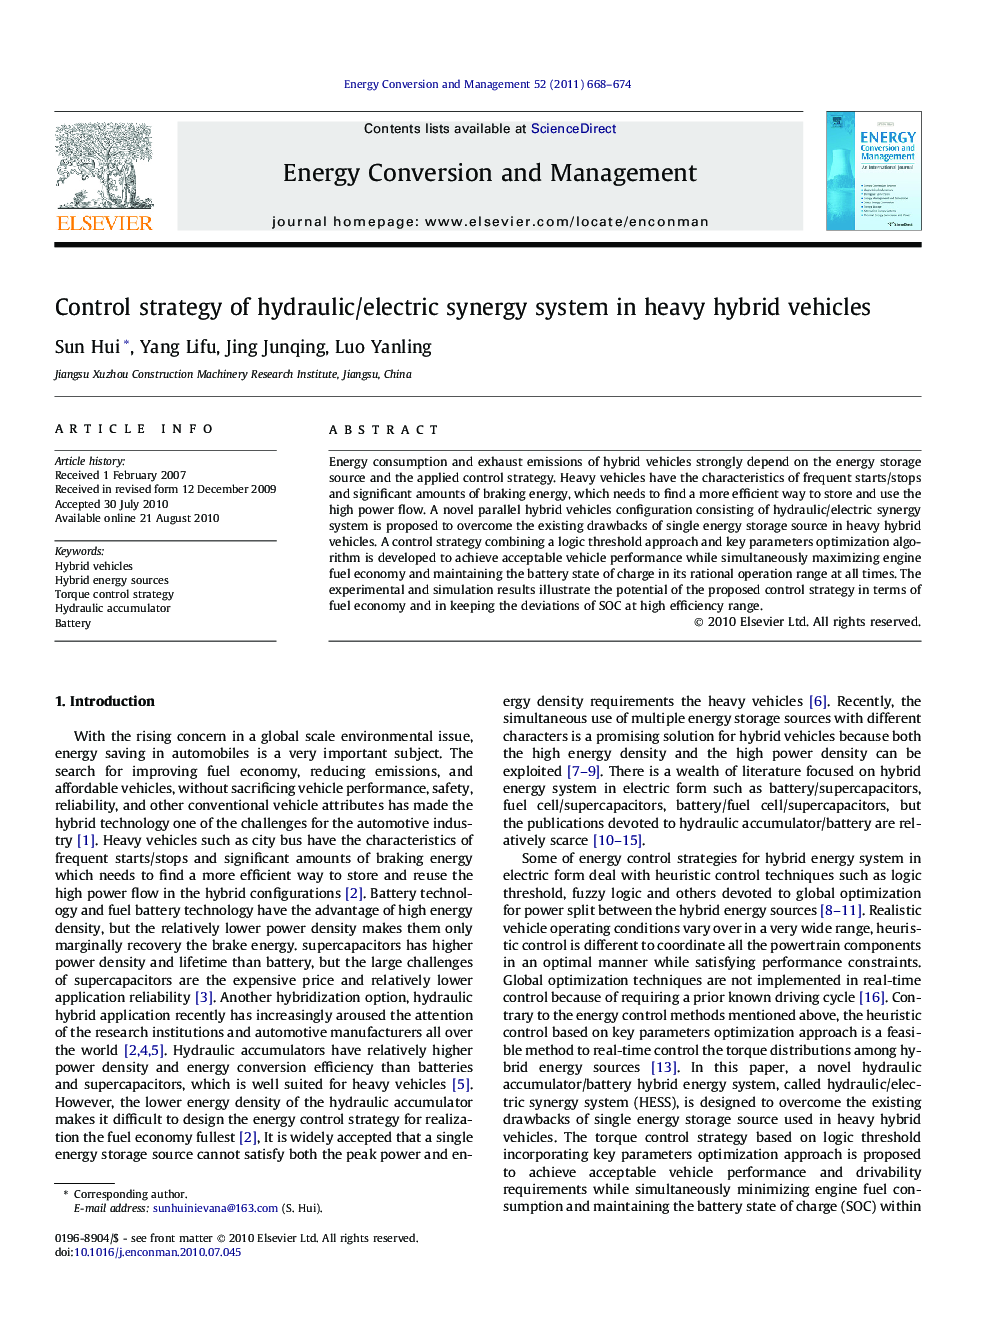 Control strategy of hydraulic/electric synergy system in heavy hybrid vehicles